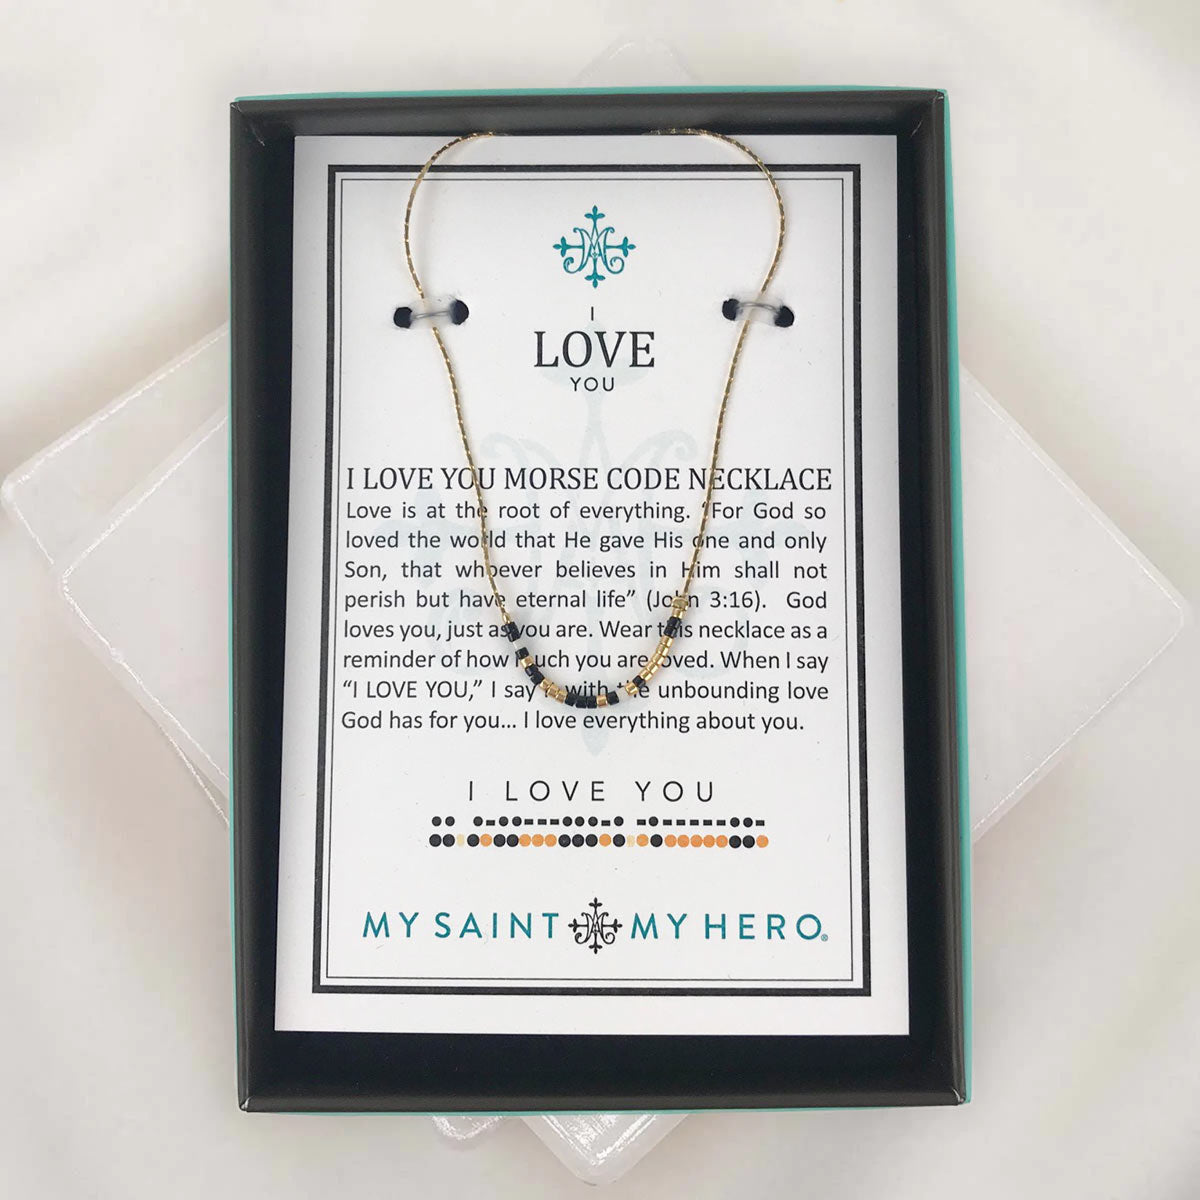 More Self Love Necklace | Madhechi